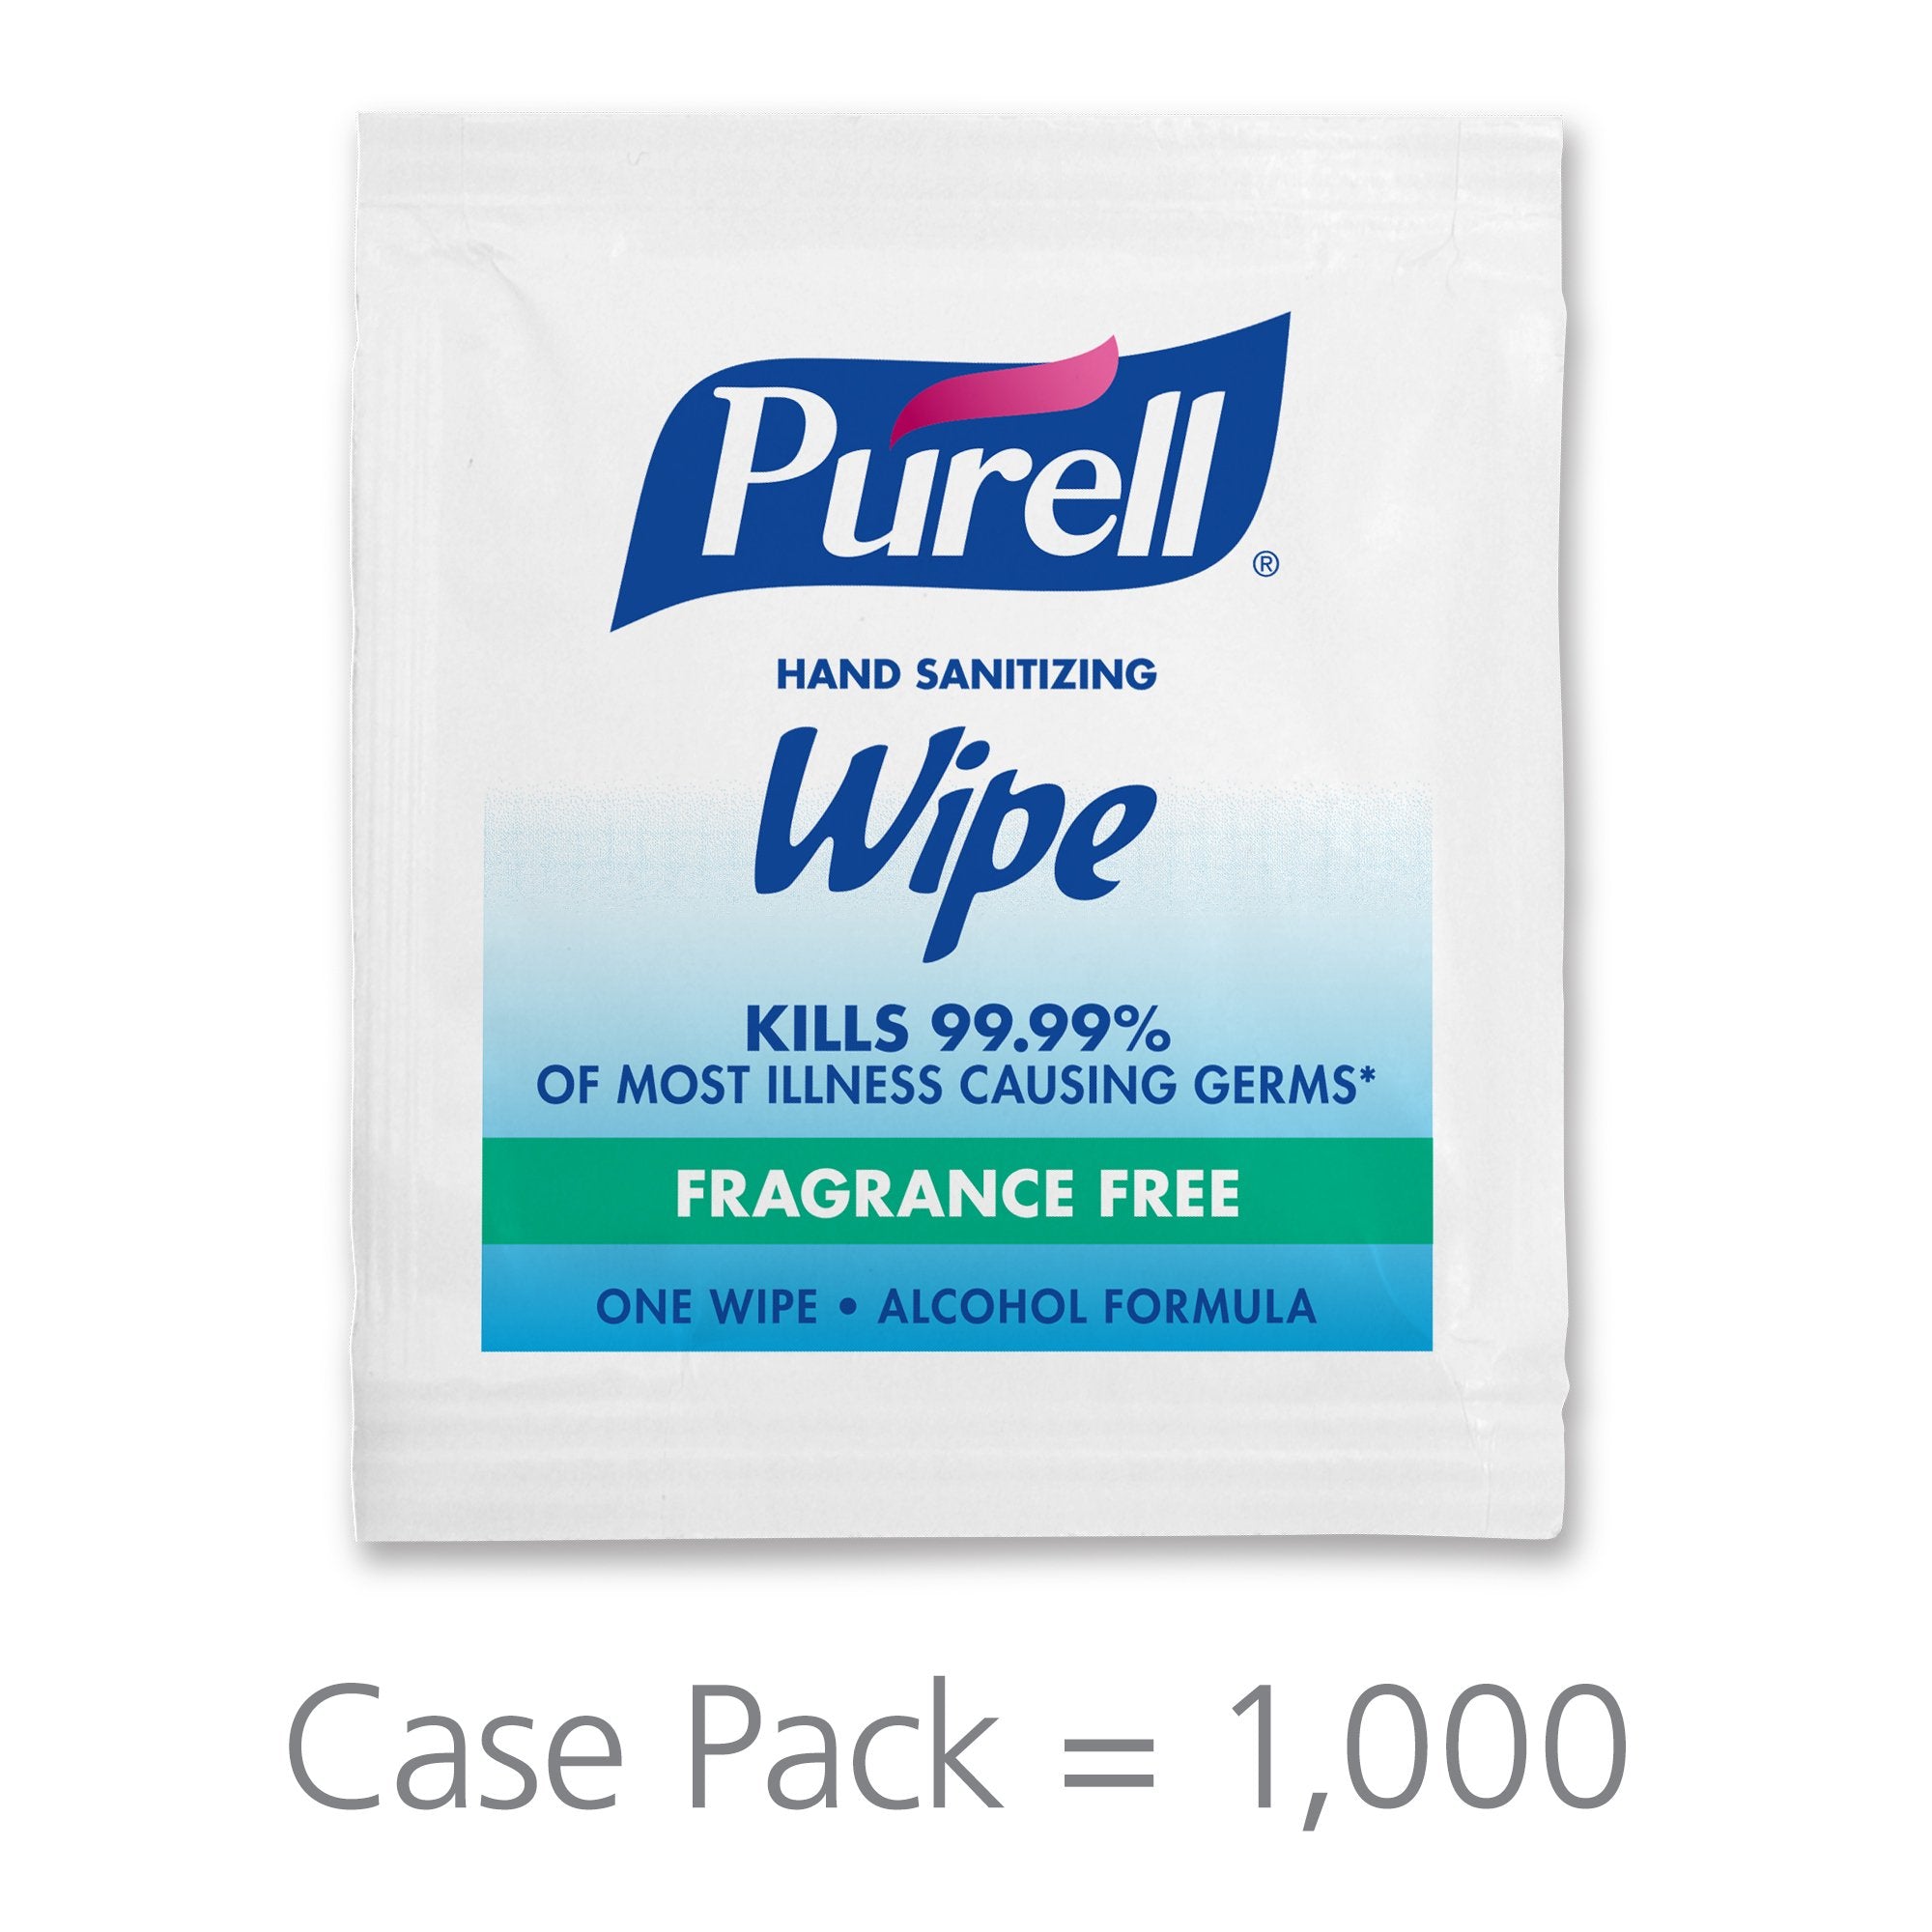 Hand Sanitizing Wipe Purell 1,000 Count Ethyl Alcohol Wipe Individual Packet